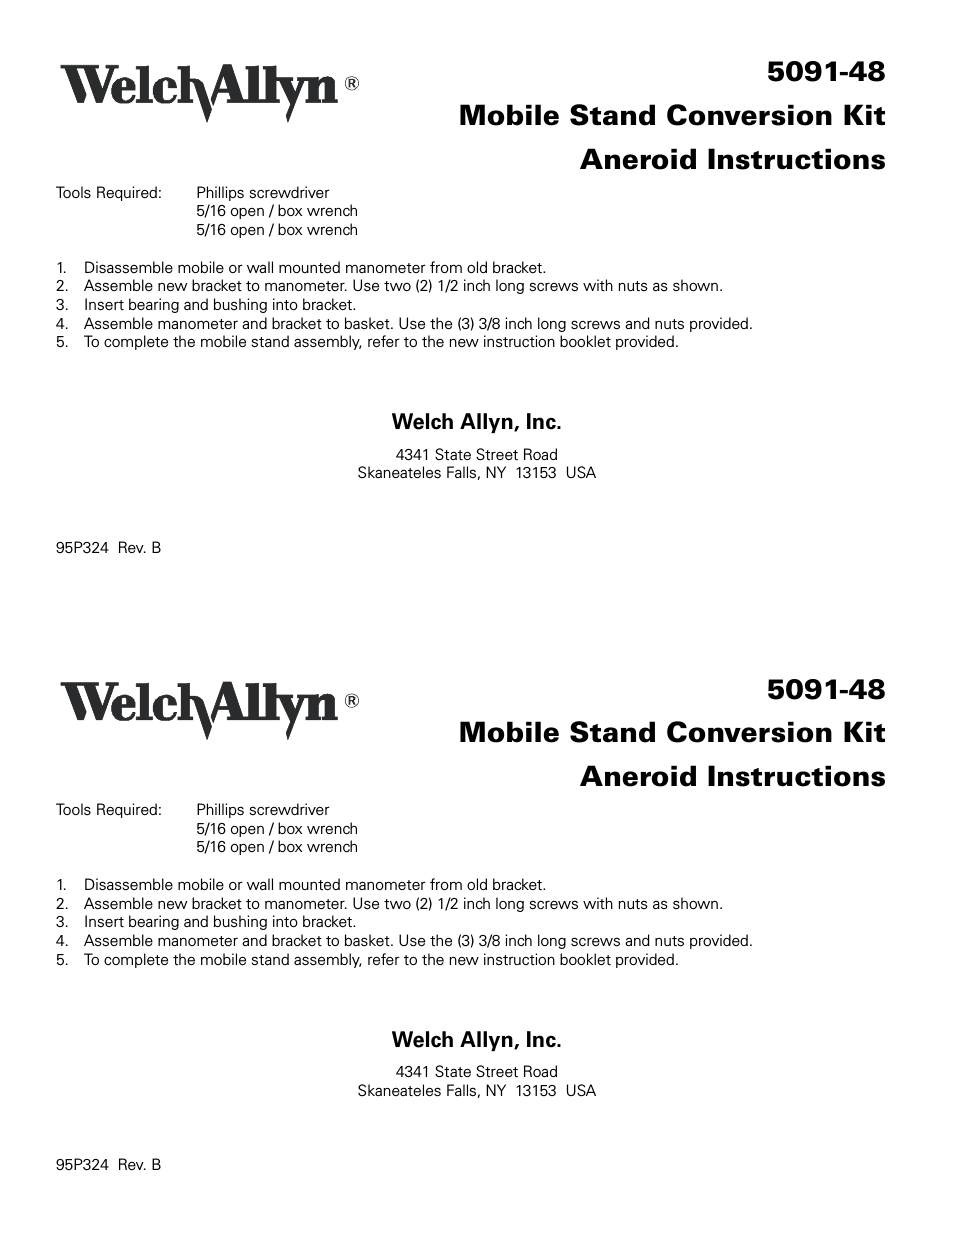 5091-48 Mobile Stand Conversion Kit, Aneroid Instructions - Installation Guide